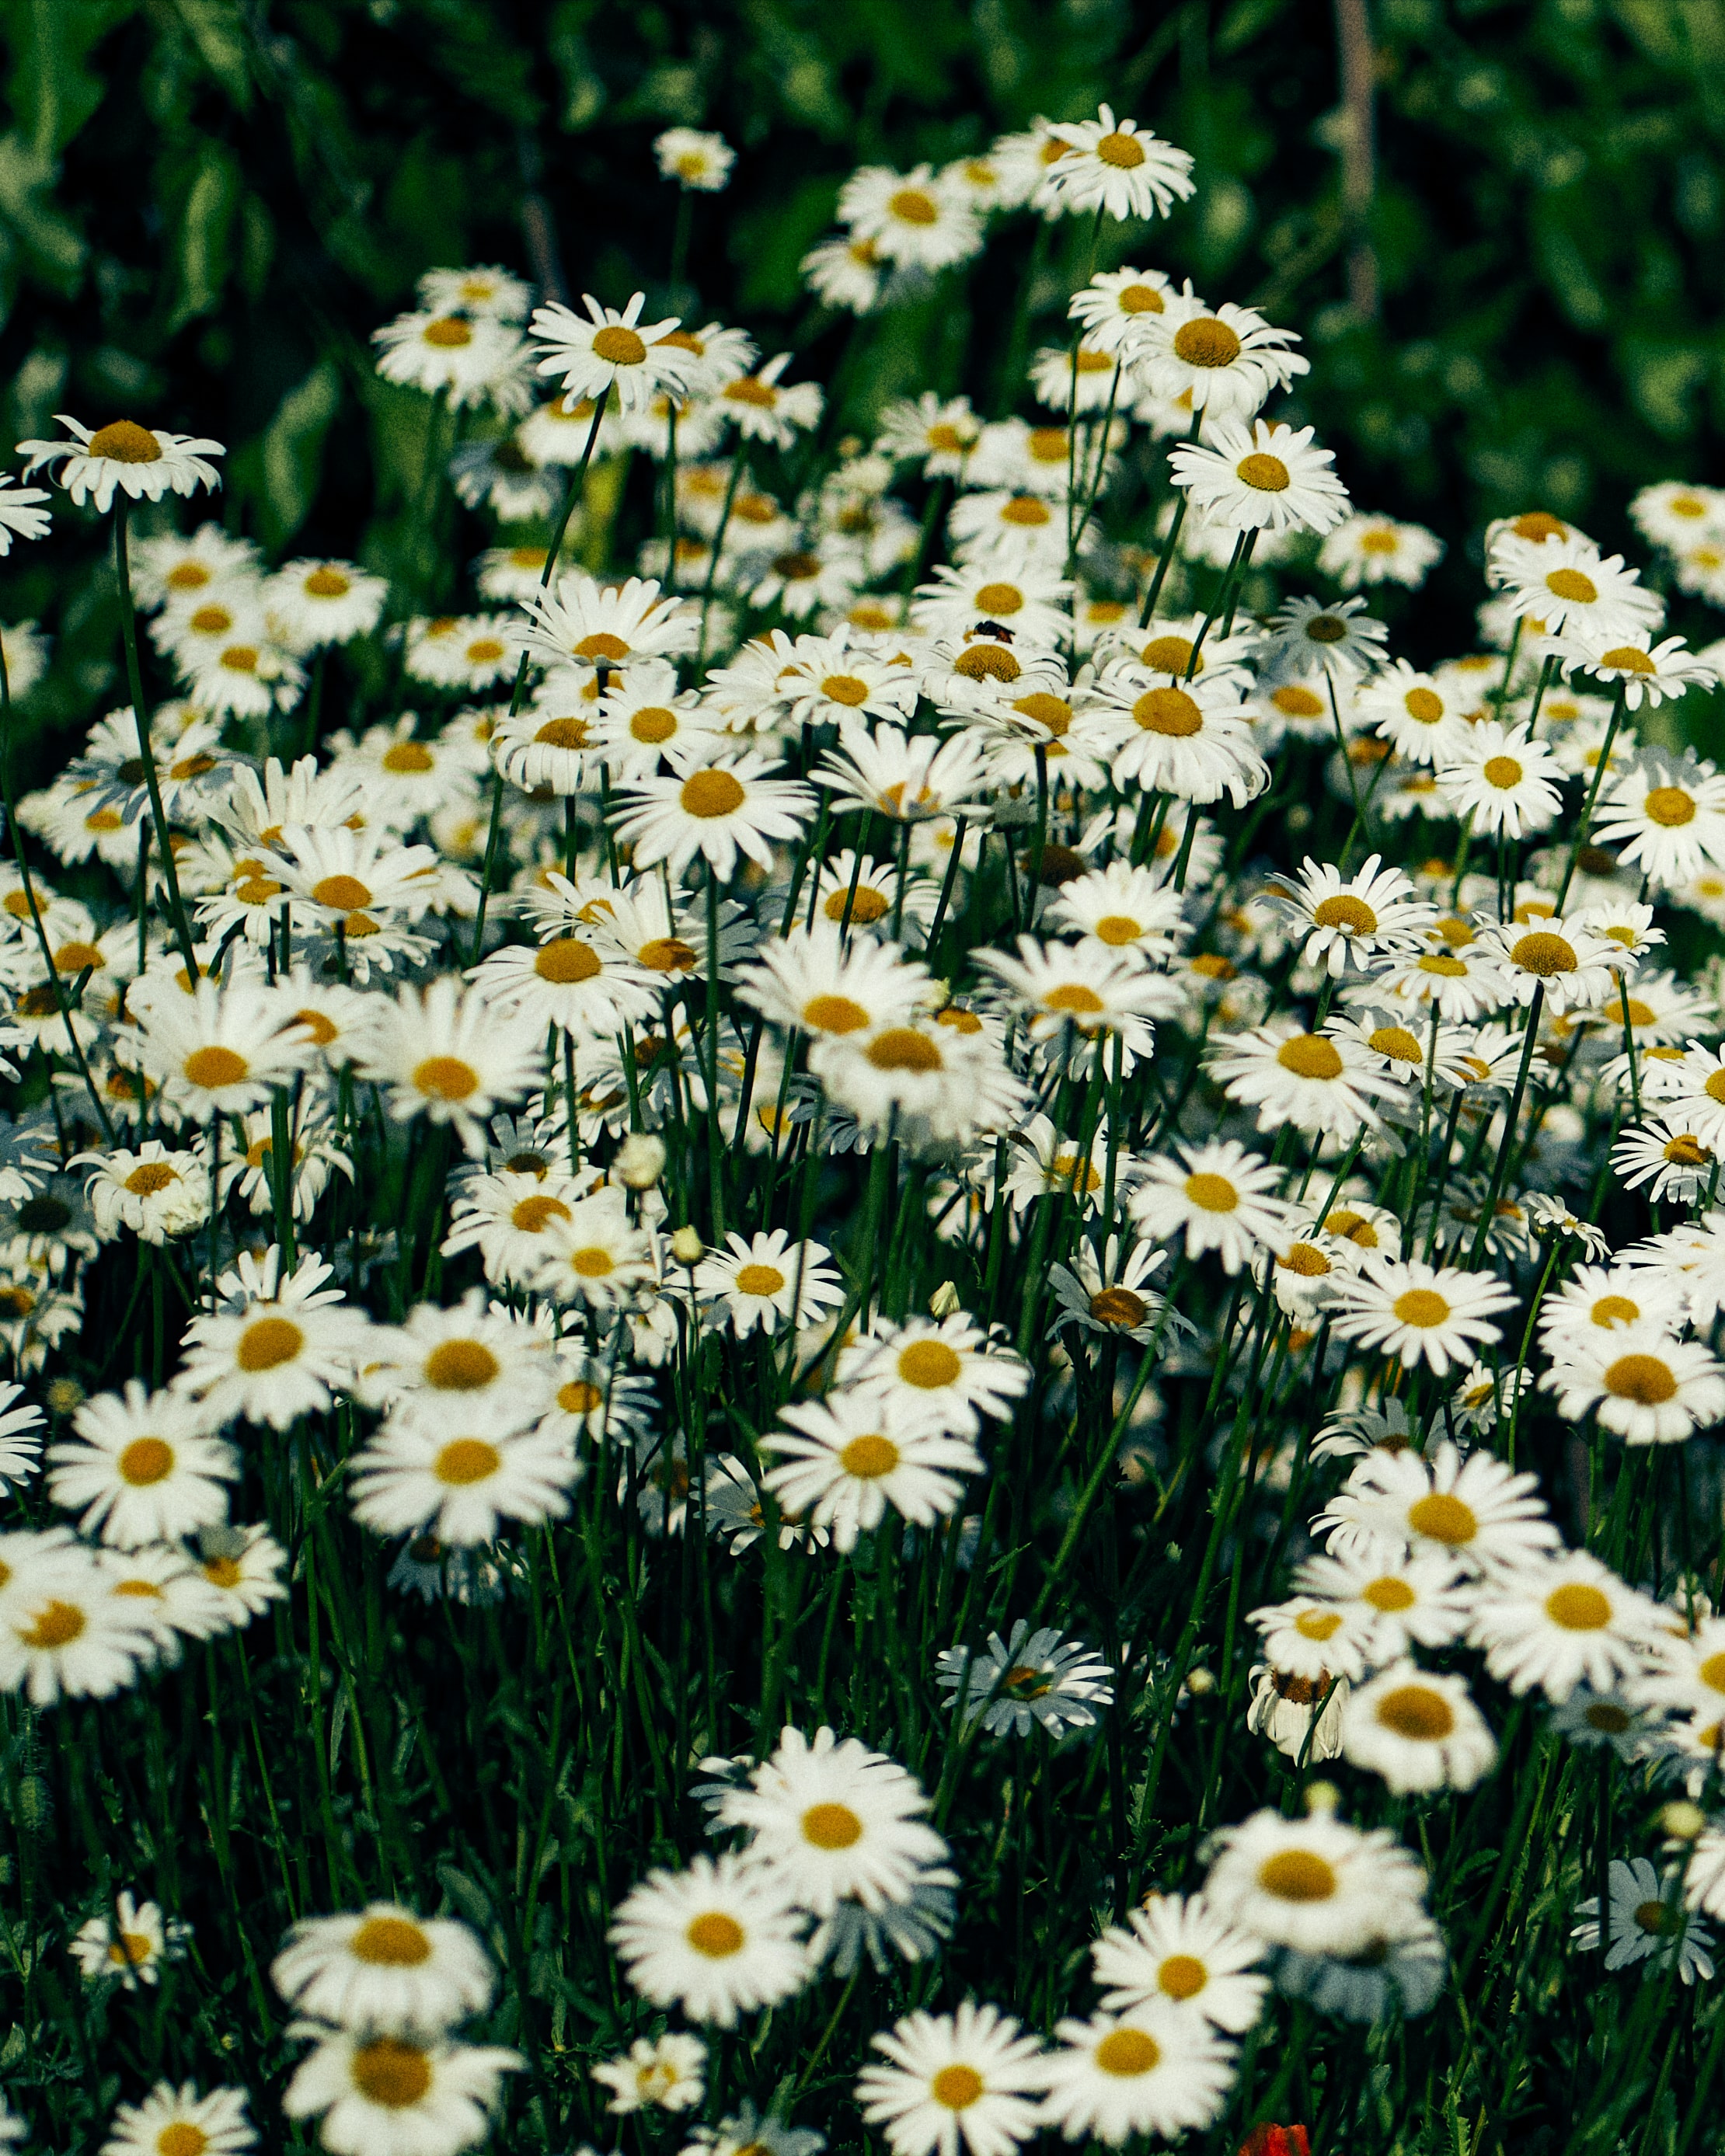 petals, wildflowers, flowers, grass, camomile phone background